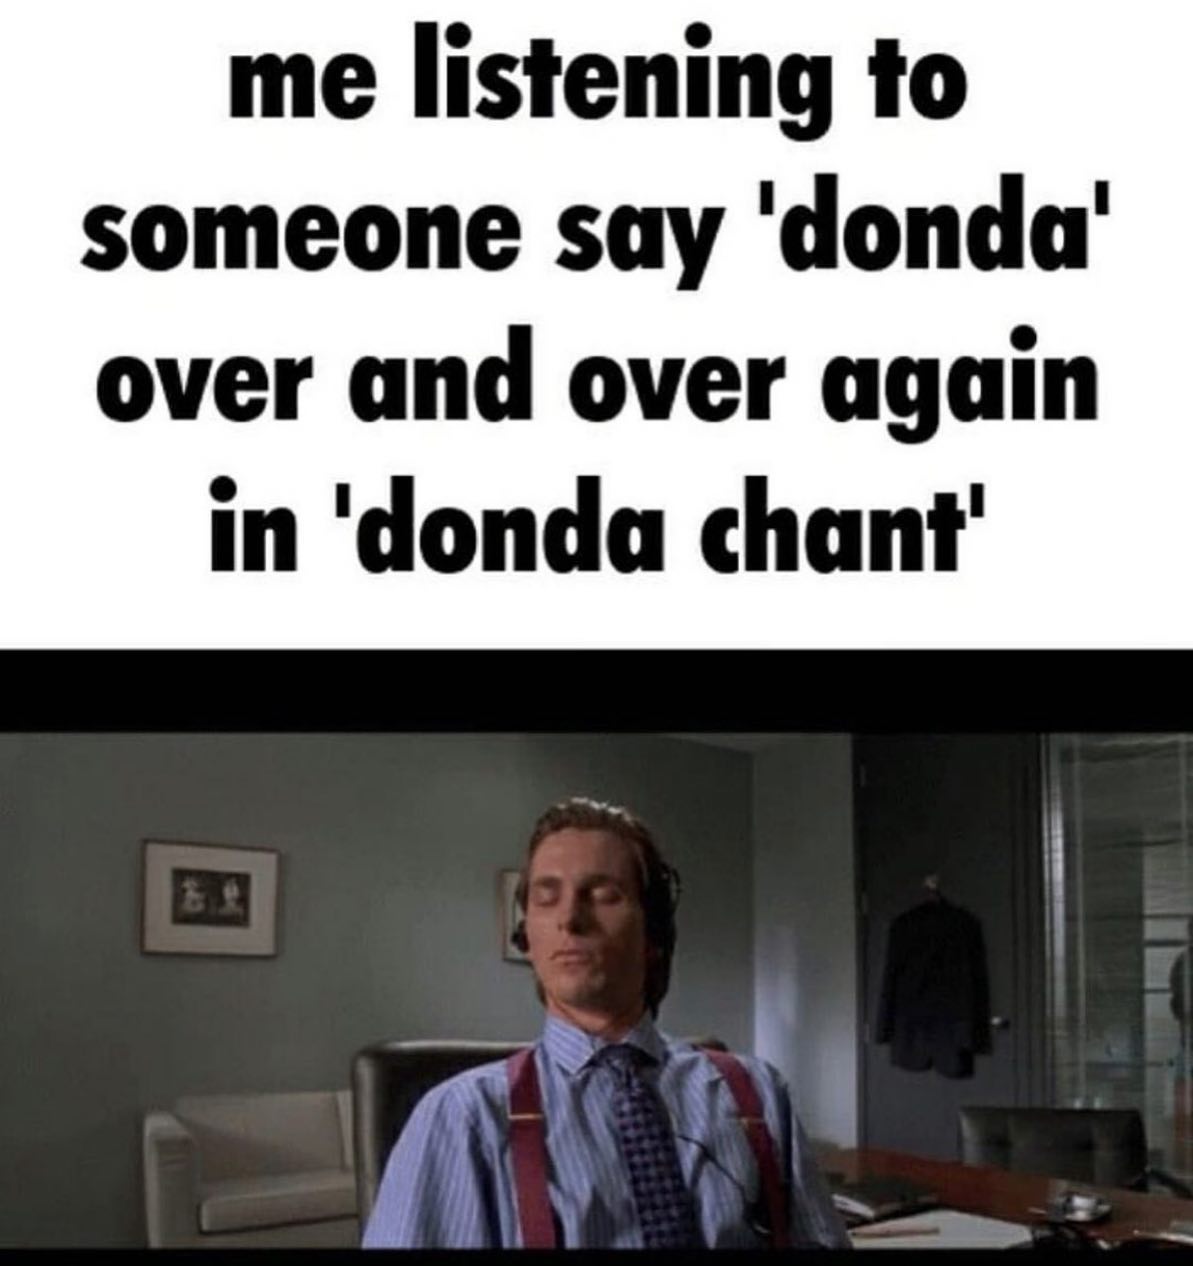 Kanye West Donda Memes - still of Christian Bale in American Psycho closing his eyes listening to music and the text 'me listening to someone say donda over and over again in donda chant